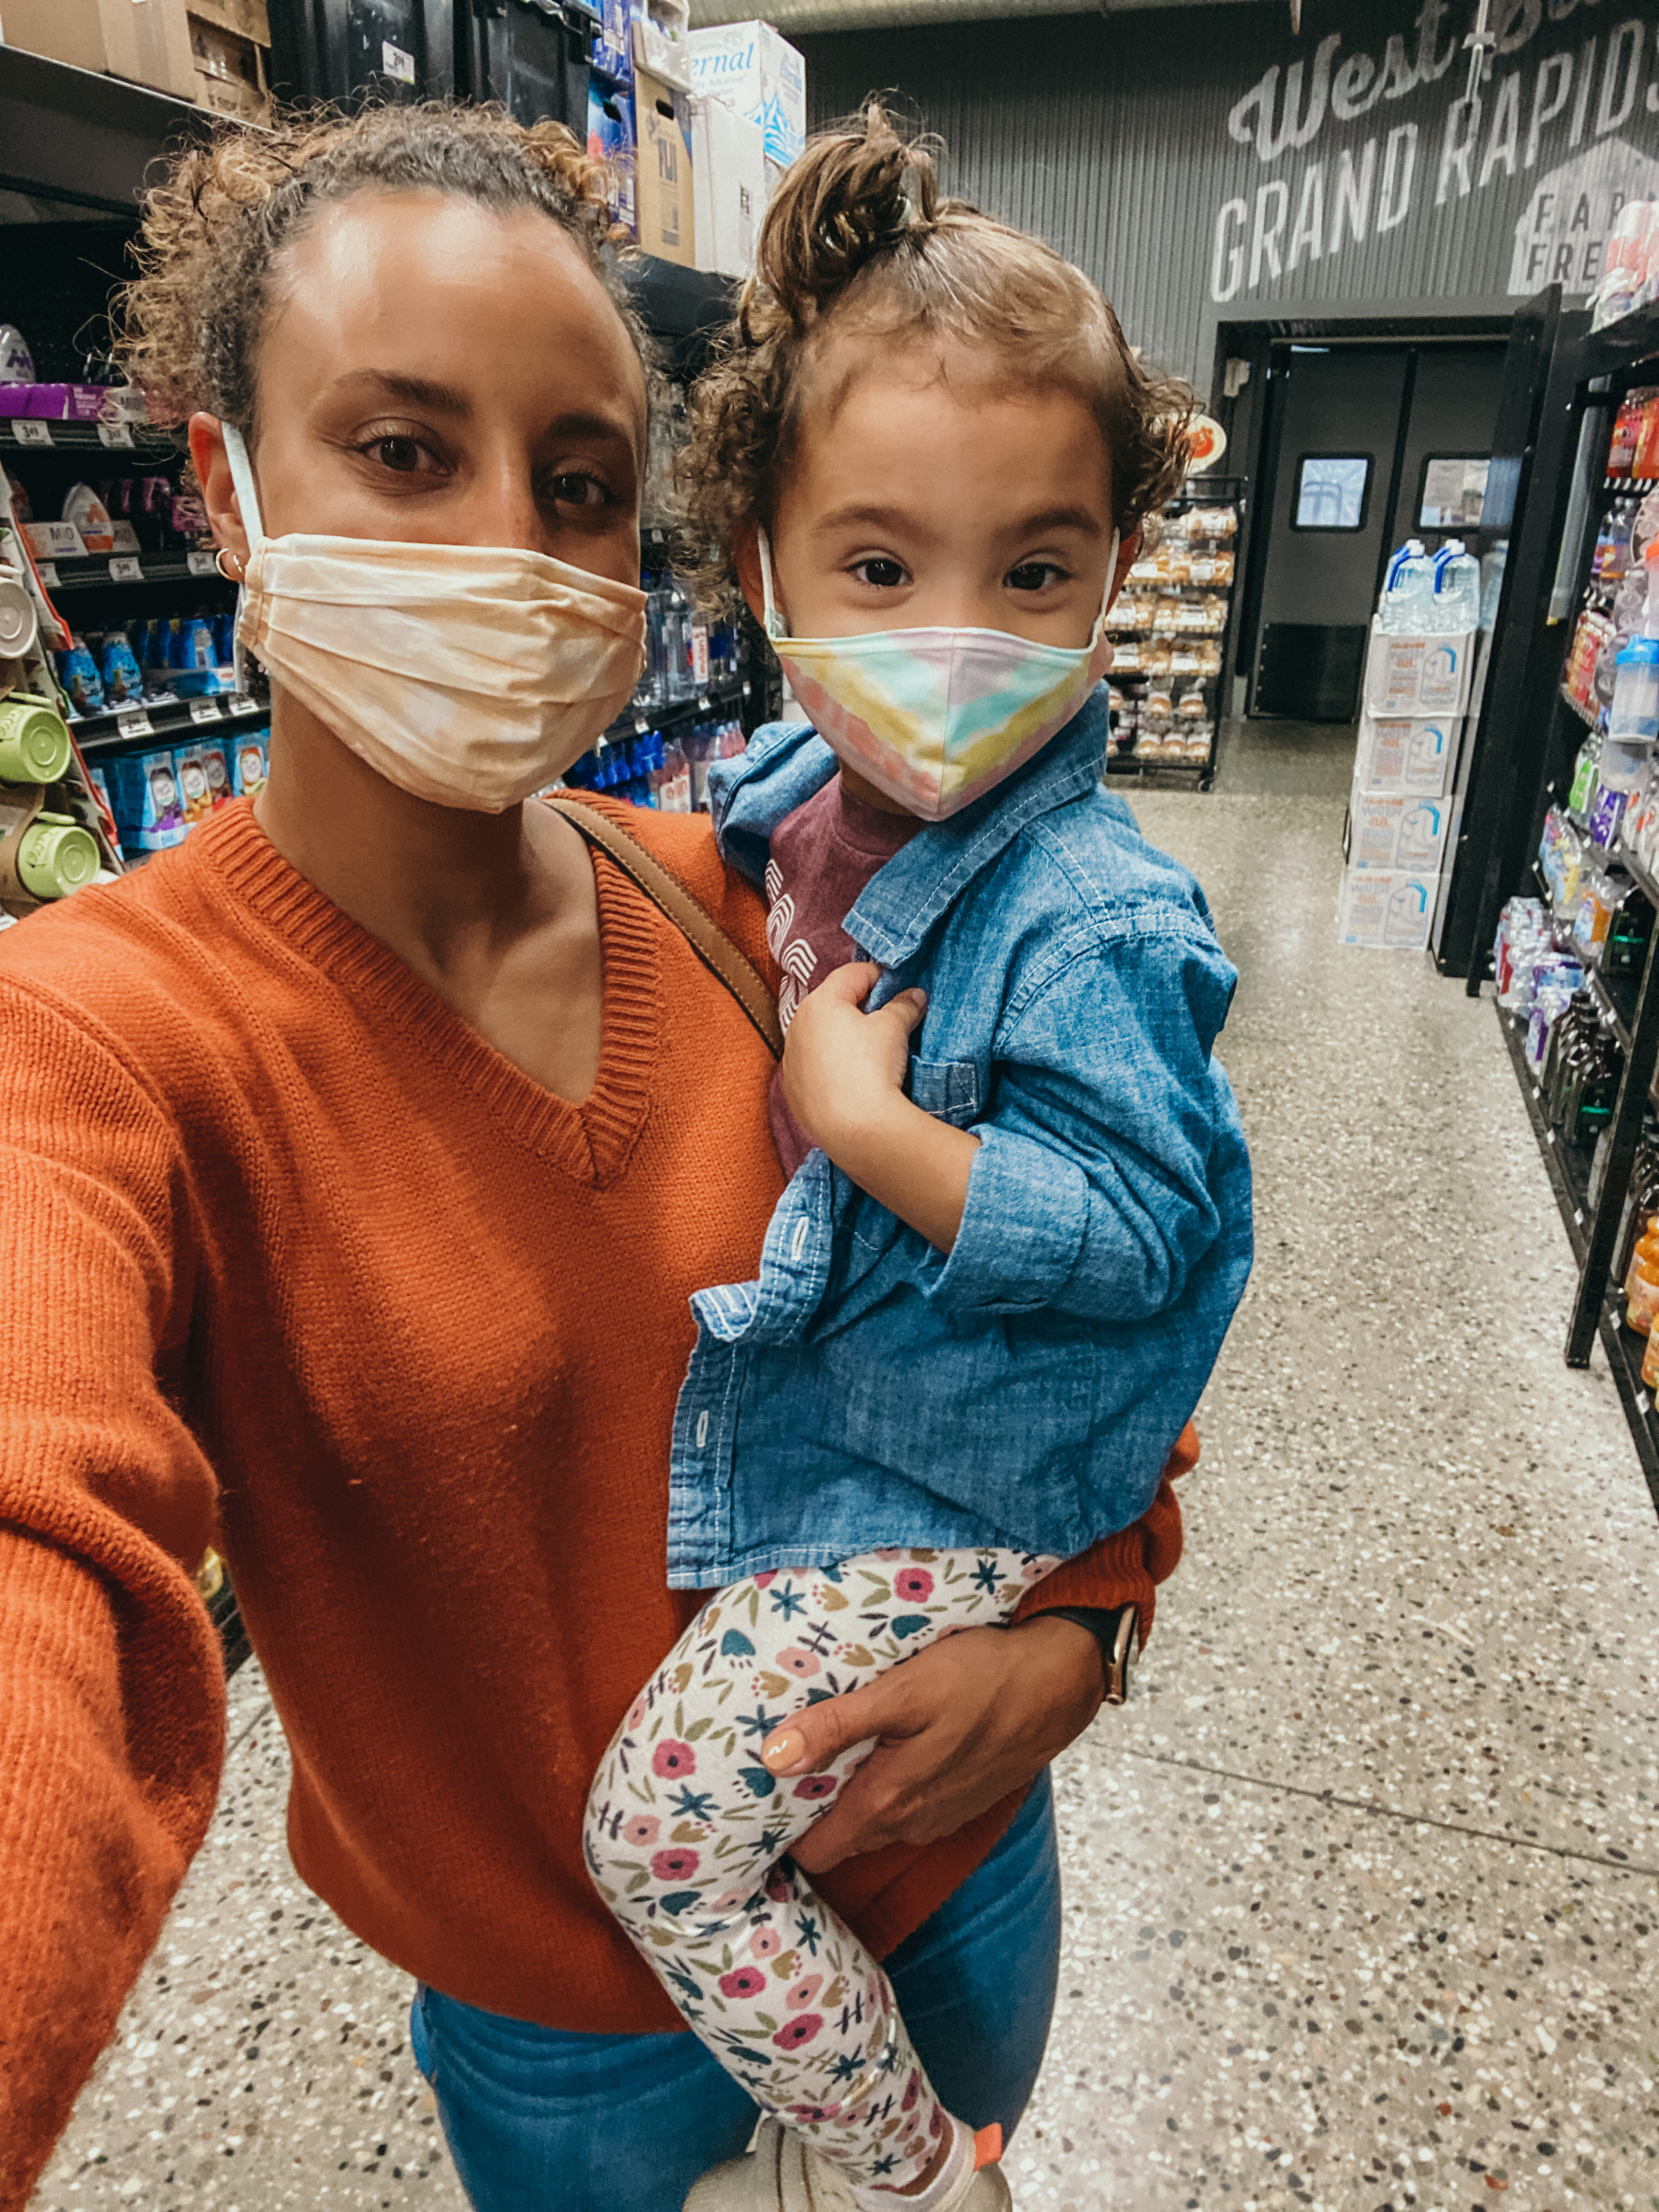 mixed race woman wearing face mask, with toddler also wearing a face mask